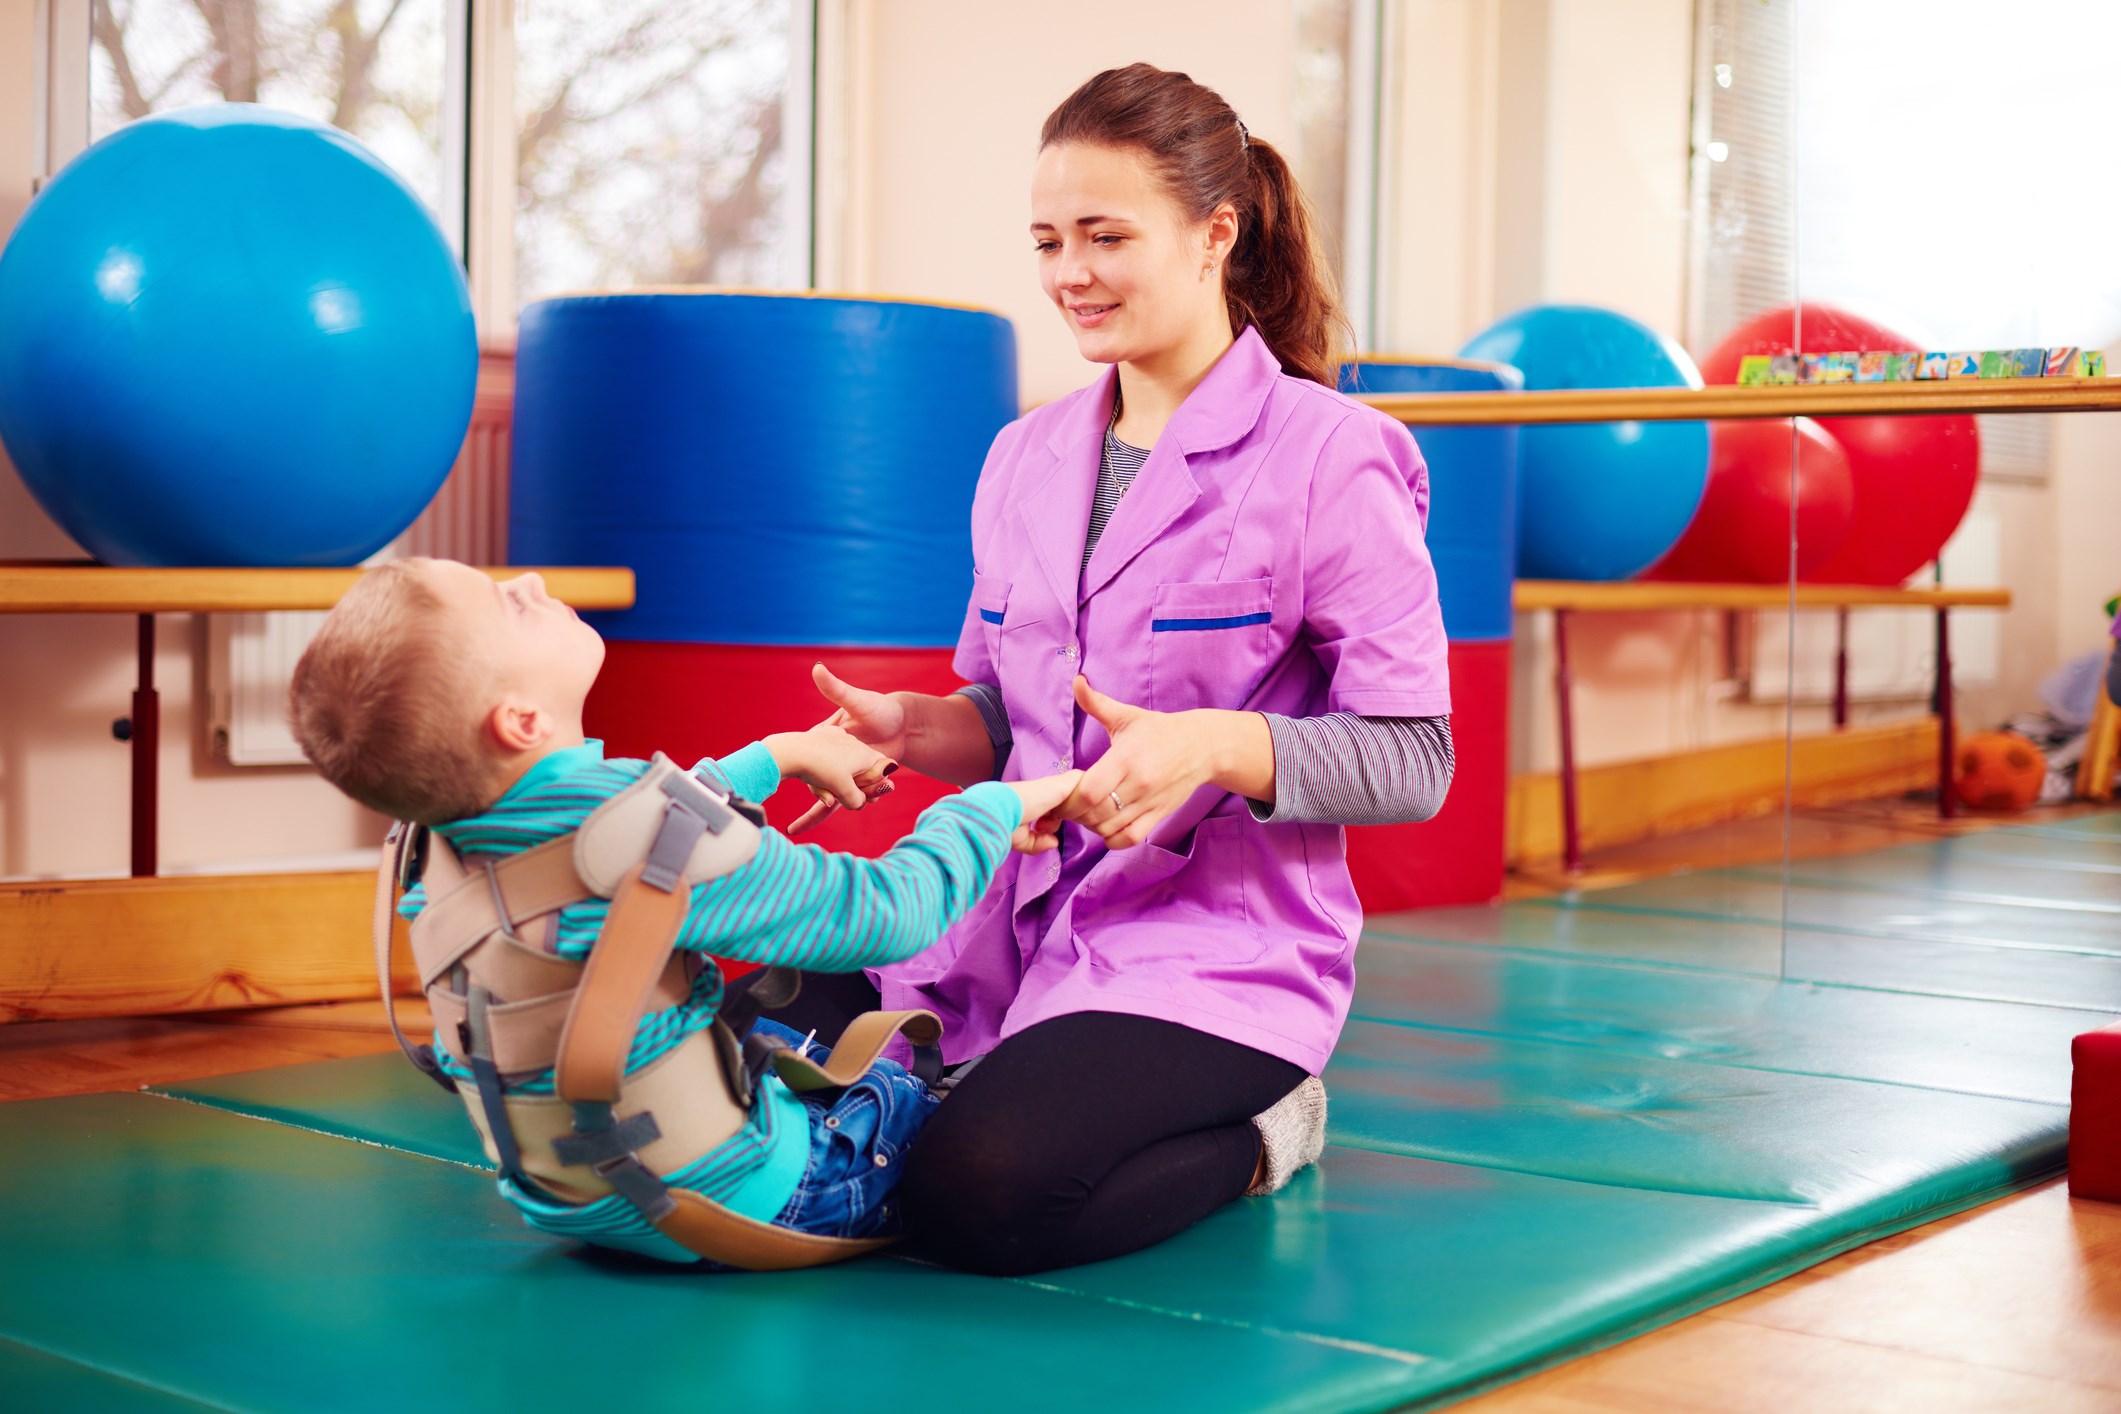 Physical therapist assisting child with special health care needs